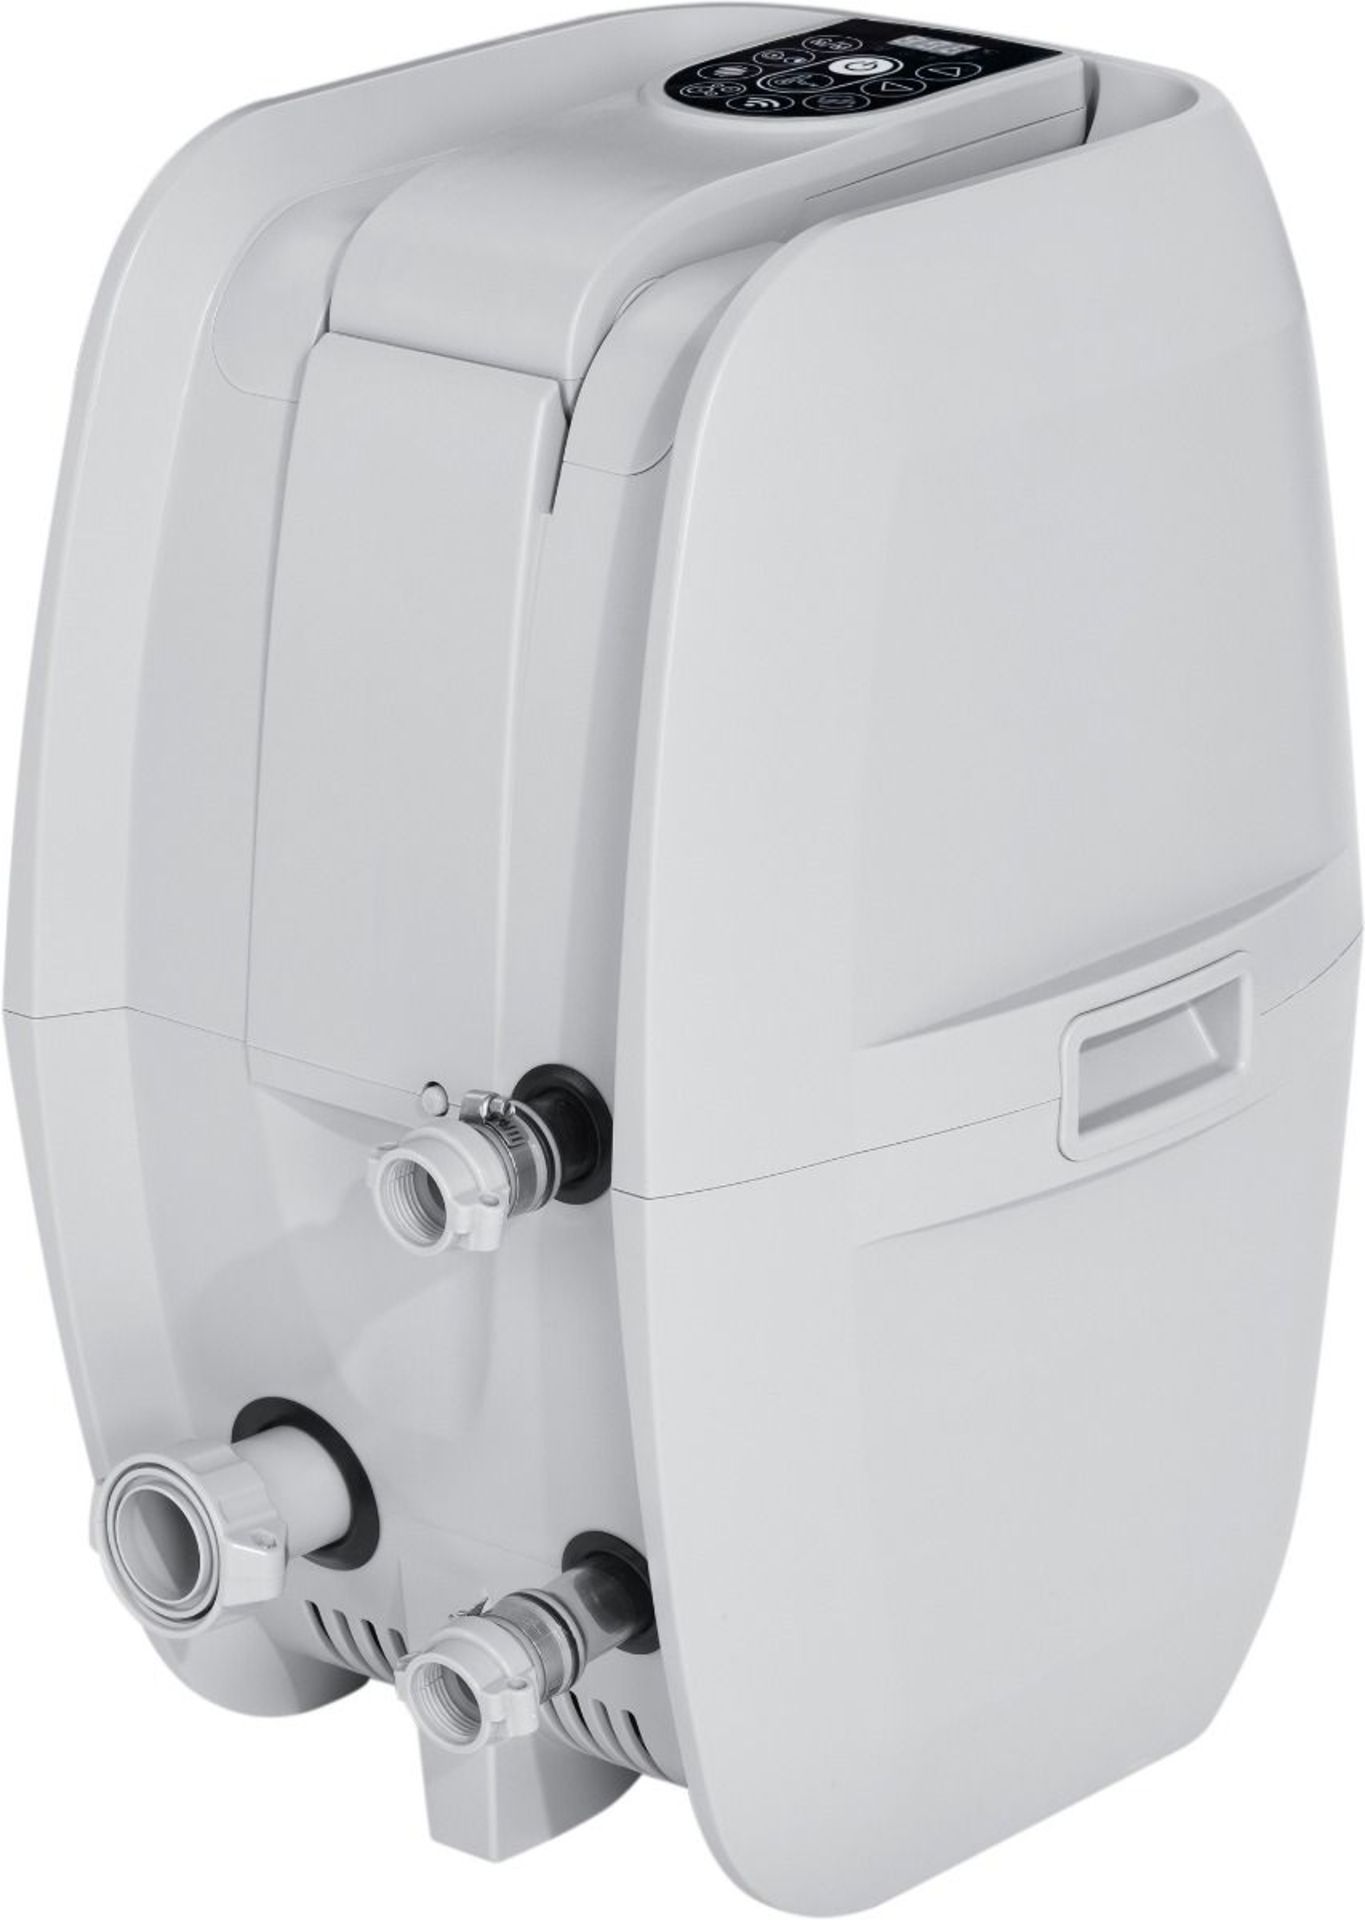 Wifi Enabled Airjet Pump with Freeze Shield. - SR3. RRP £299.99. This Lay?Z?Spa pump with WiFi is